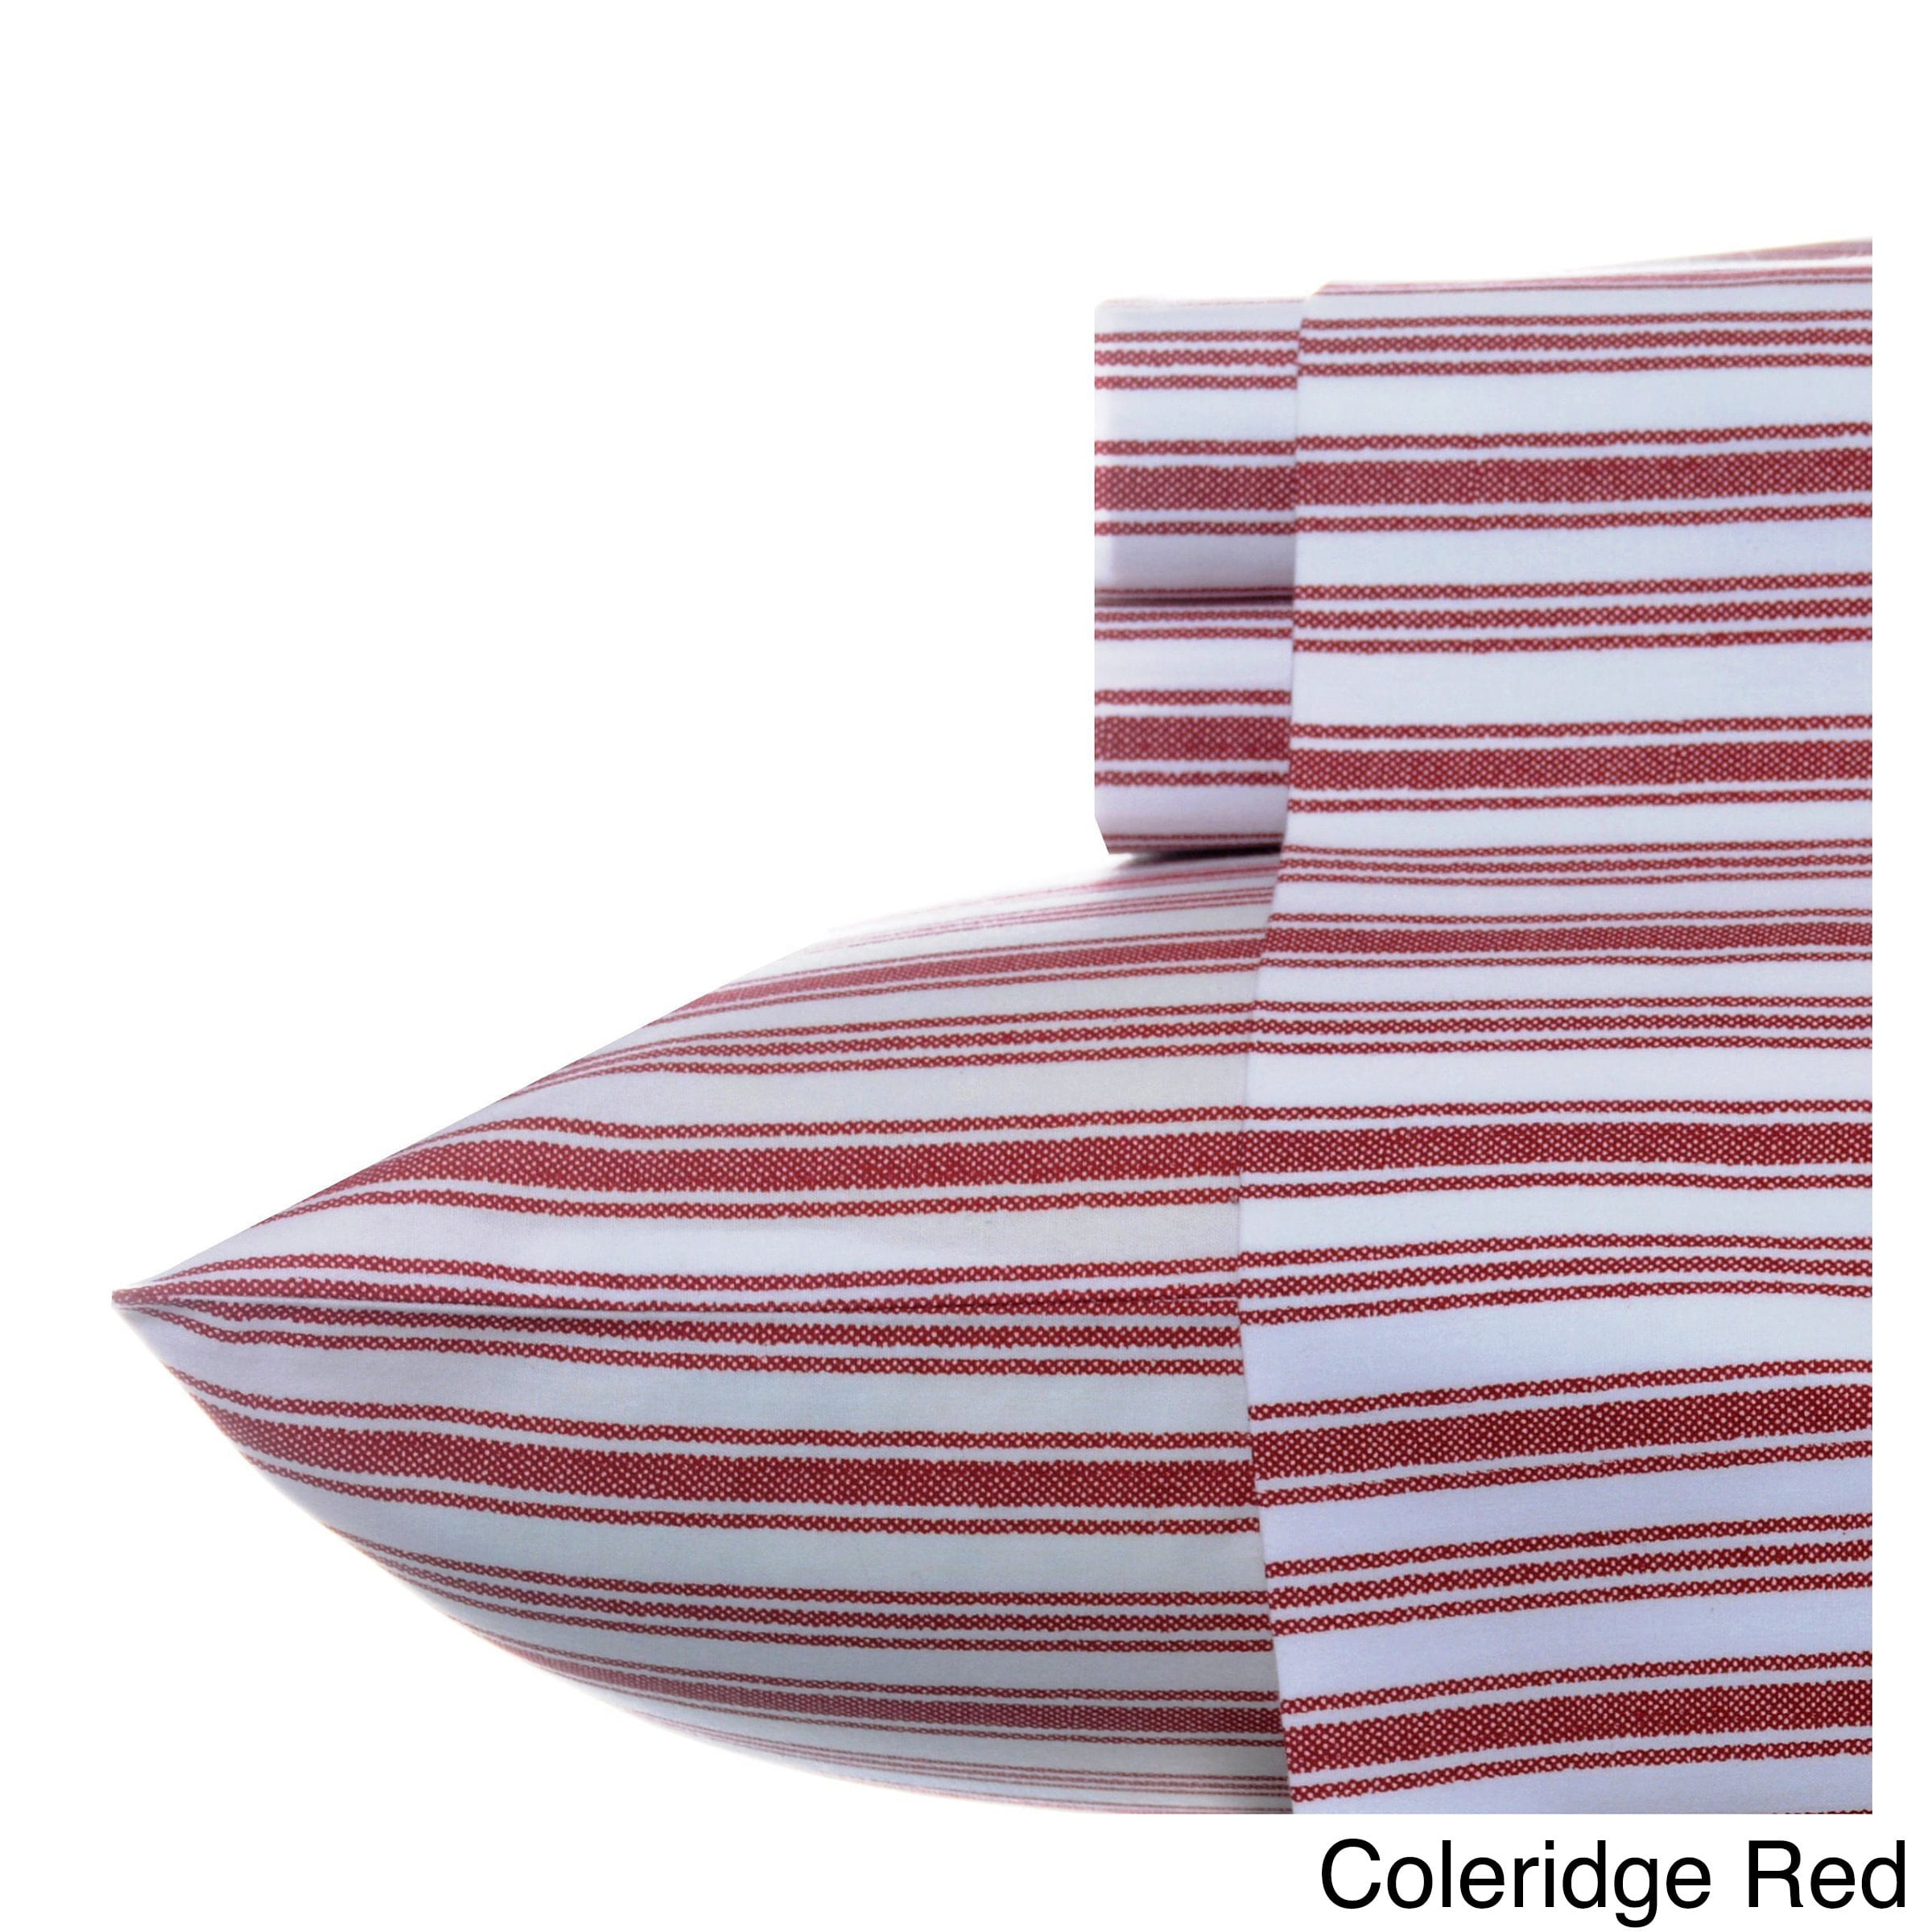 Anchor Star Plaid Nautica Easy Care & Wrinkle Resistant 3 Piece Twin Sheet Set Red, Blue 